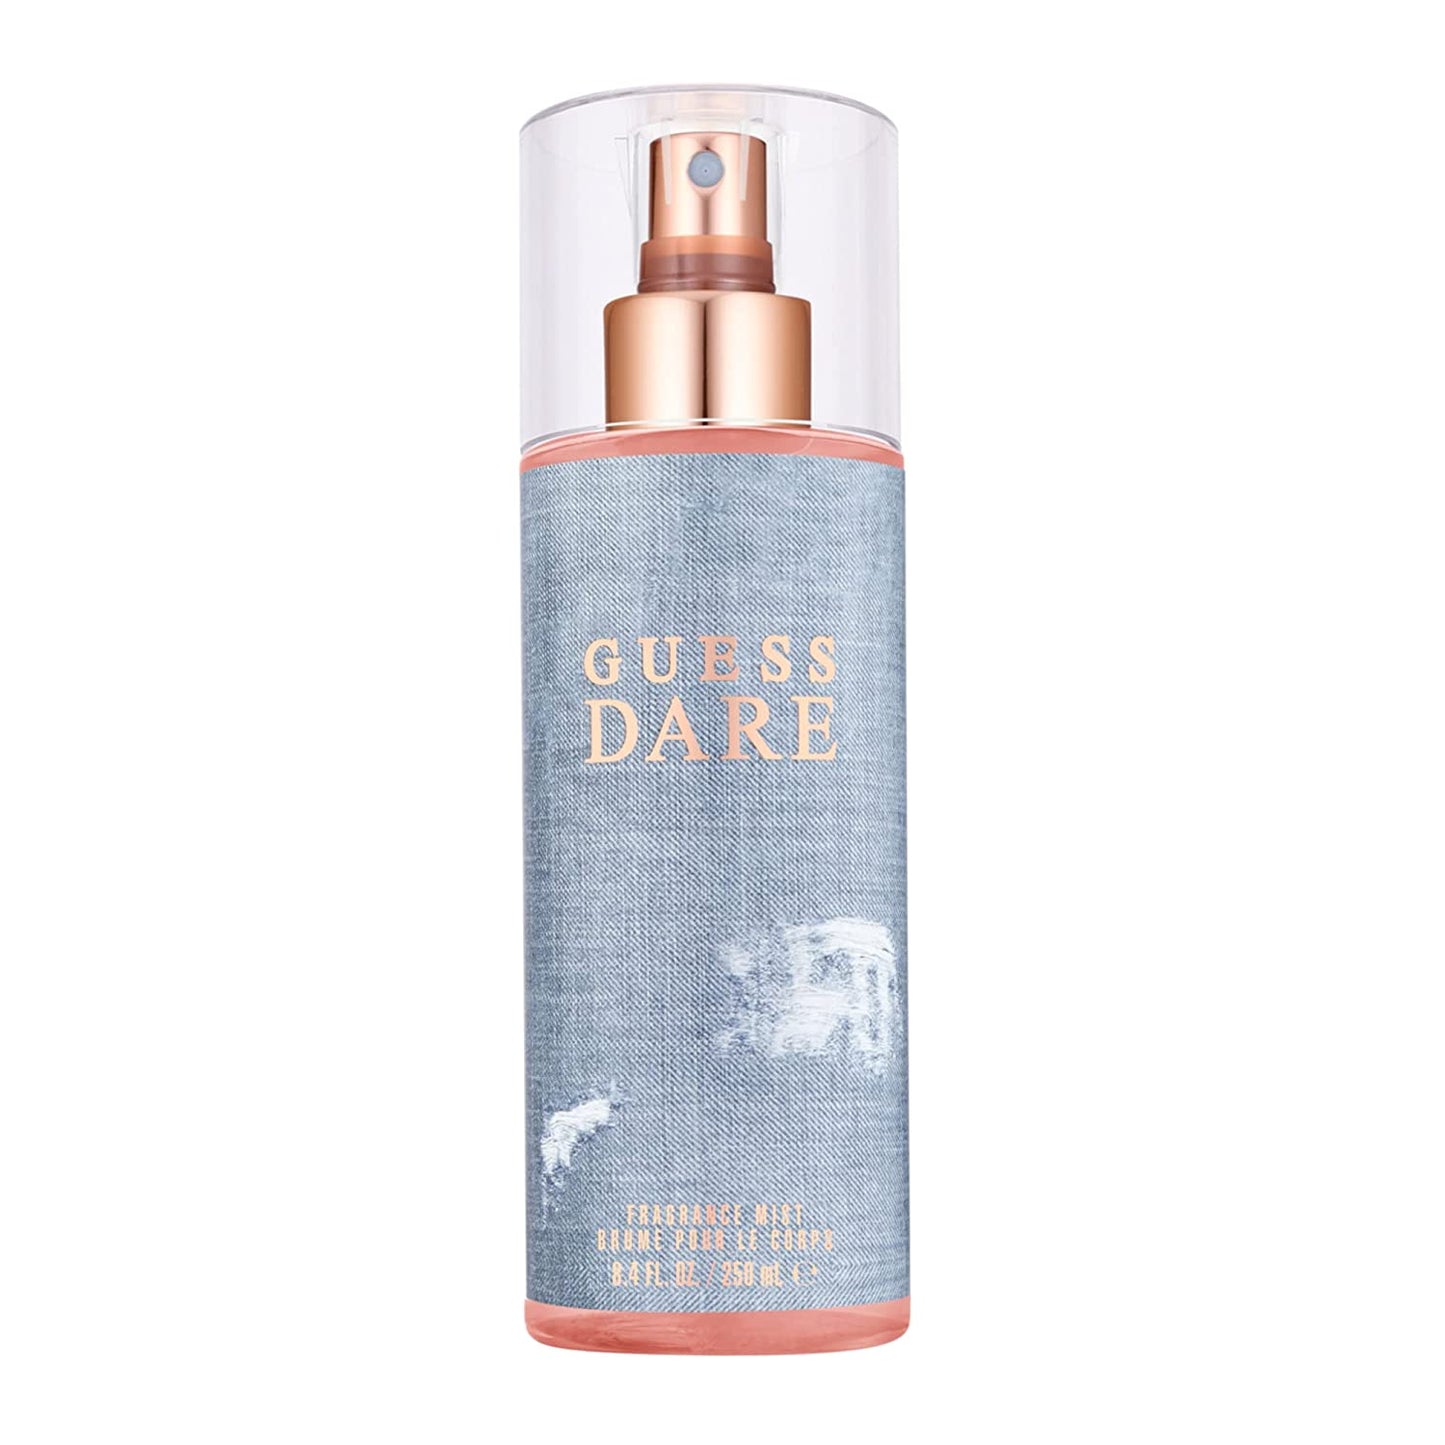 Guess Dare Body Mist - Perfume Planet 